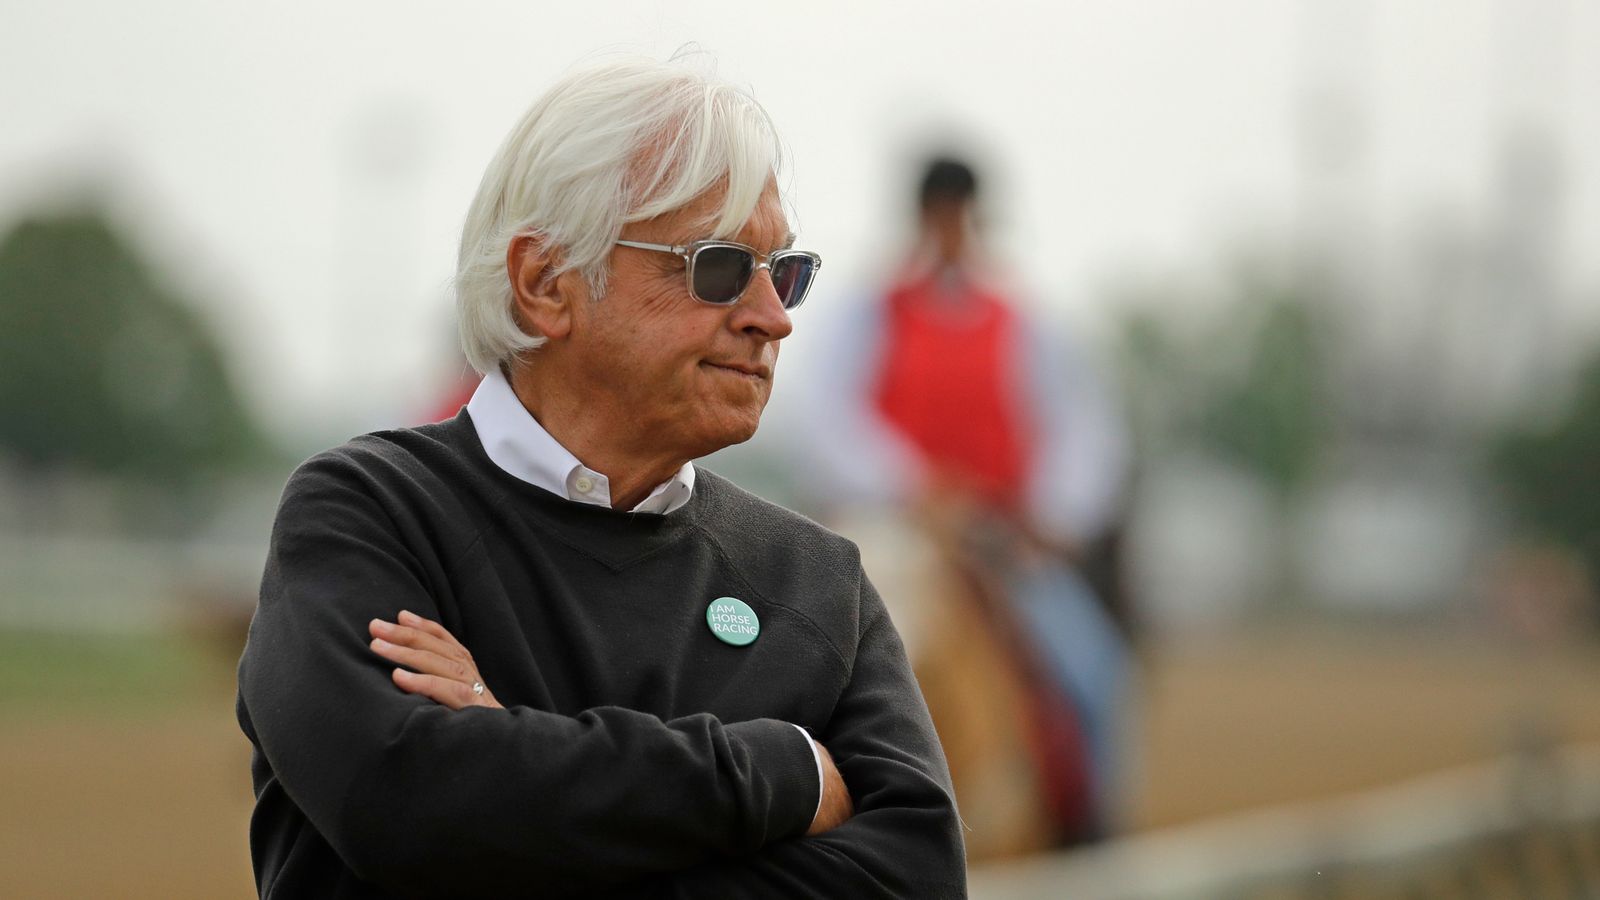 Bob Baffert: American trainer free to run horses at New York tracks after injunction pending a final hearing